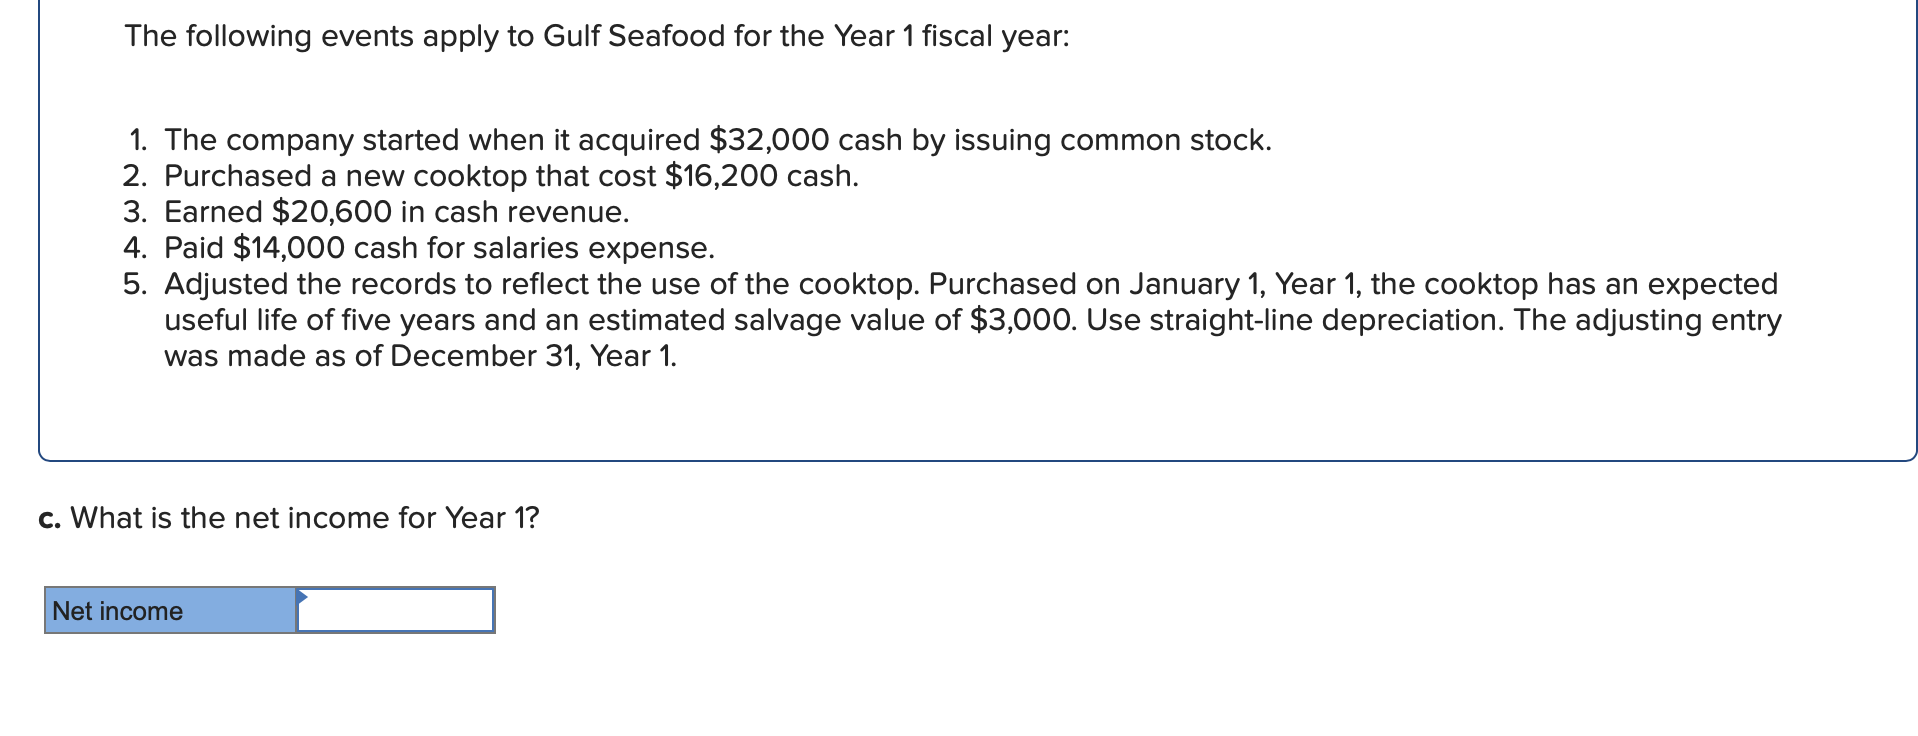 Solved The following events apply to Gulf Seafood for the